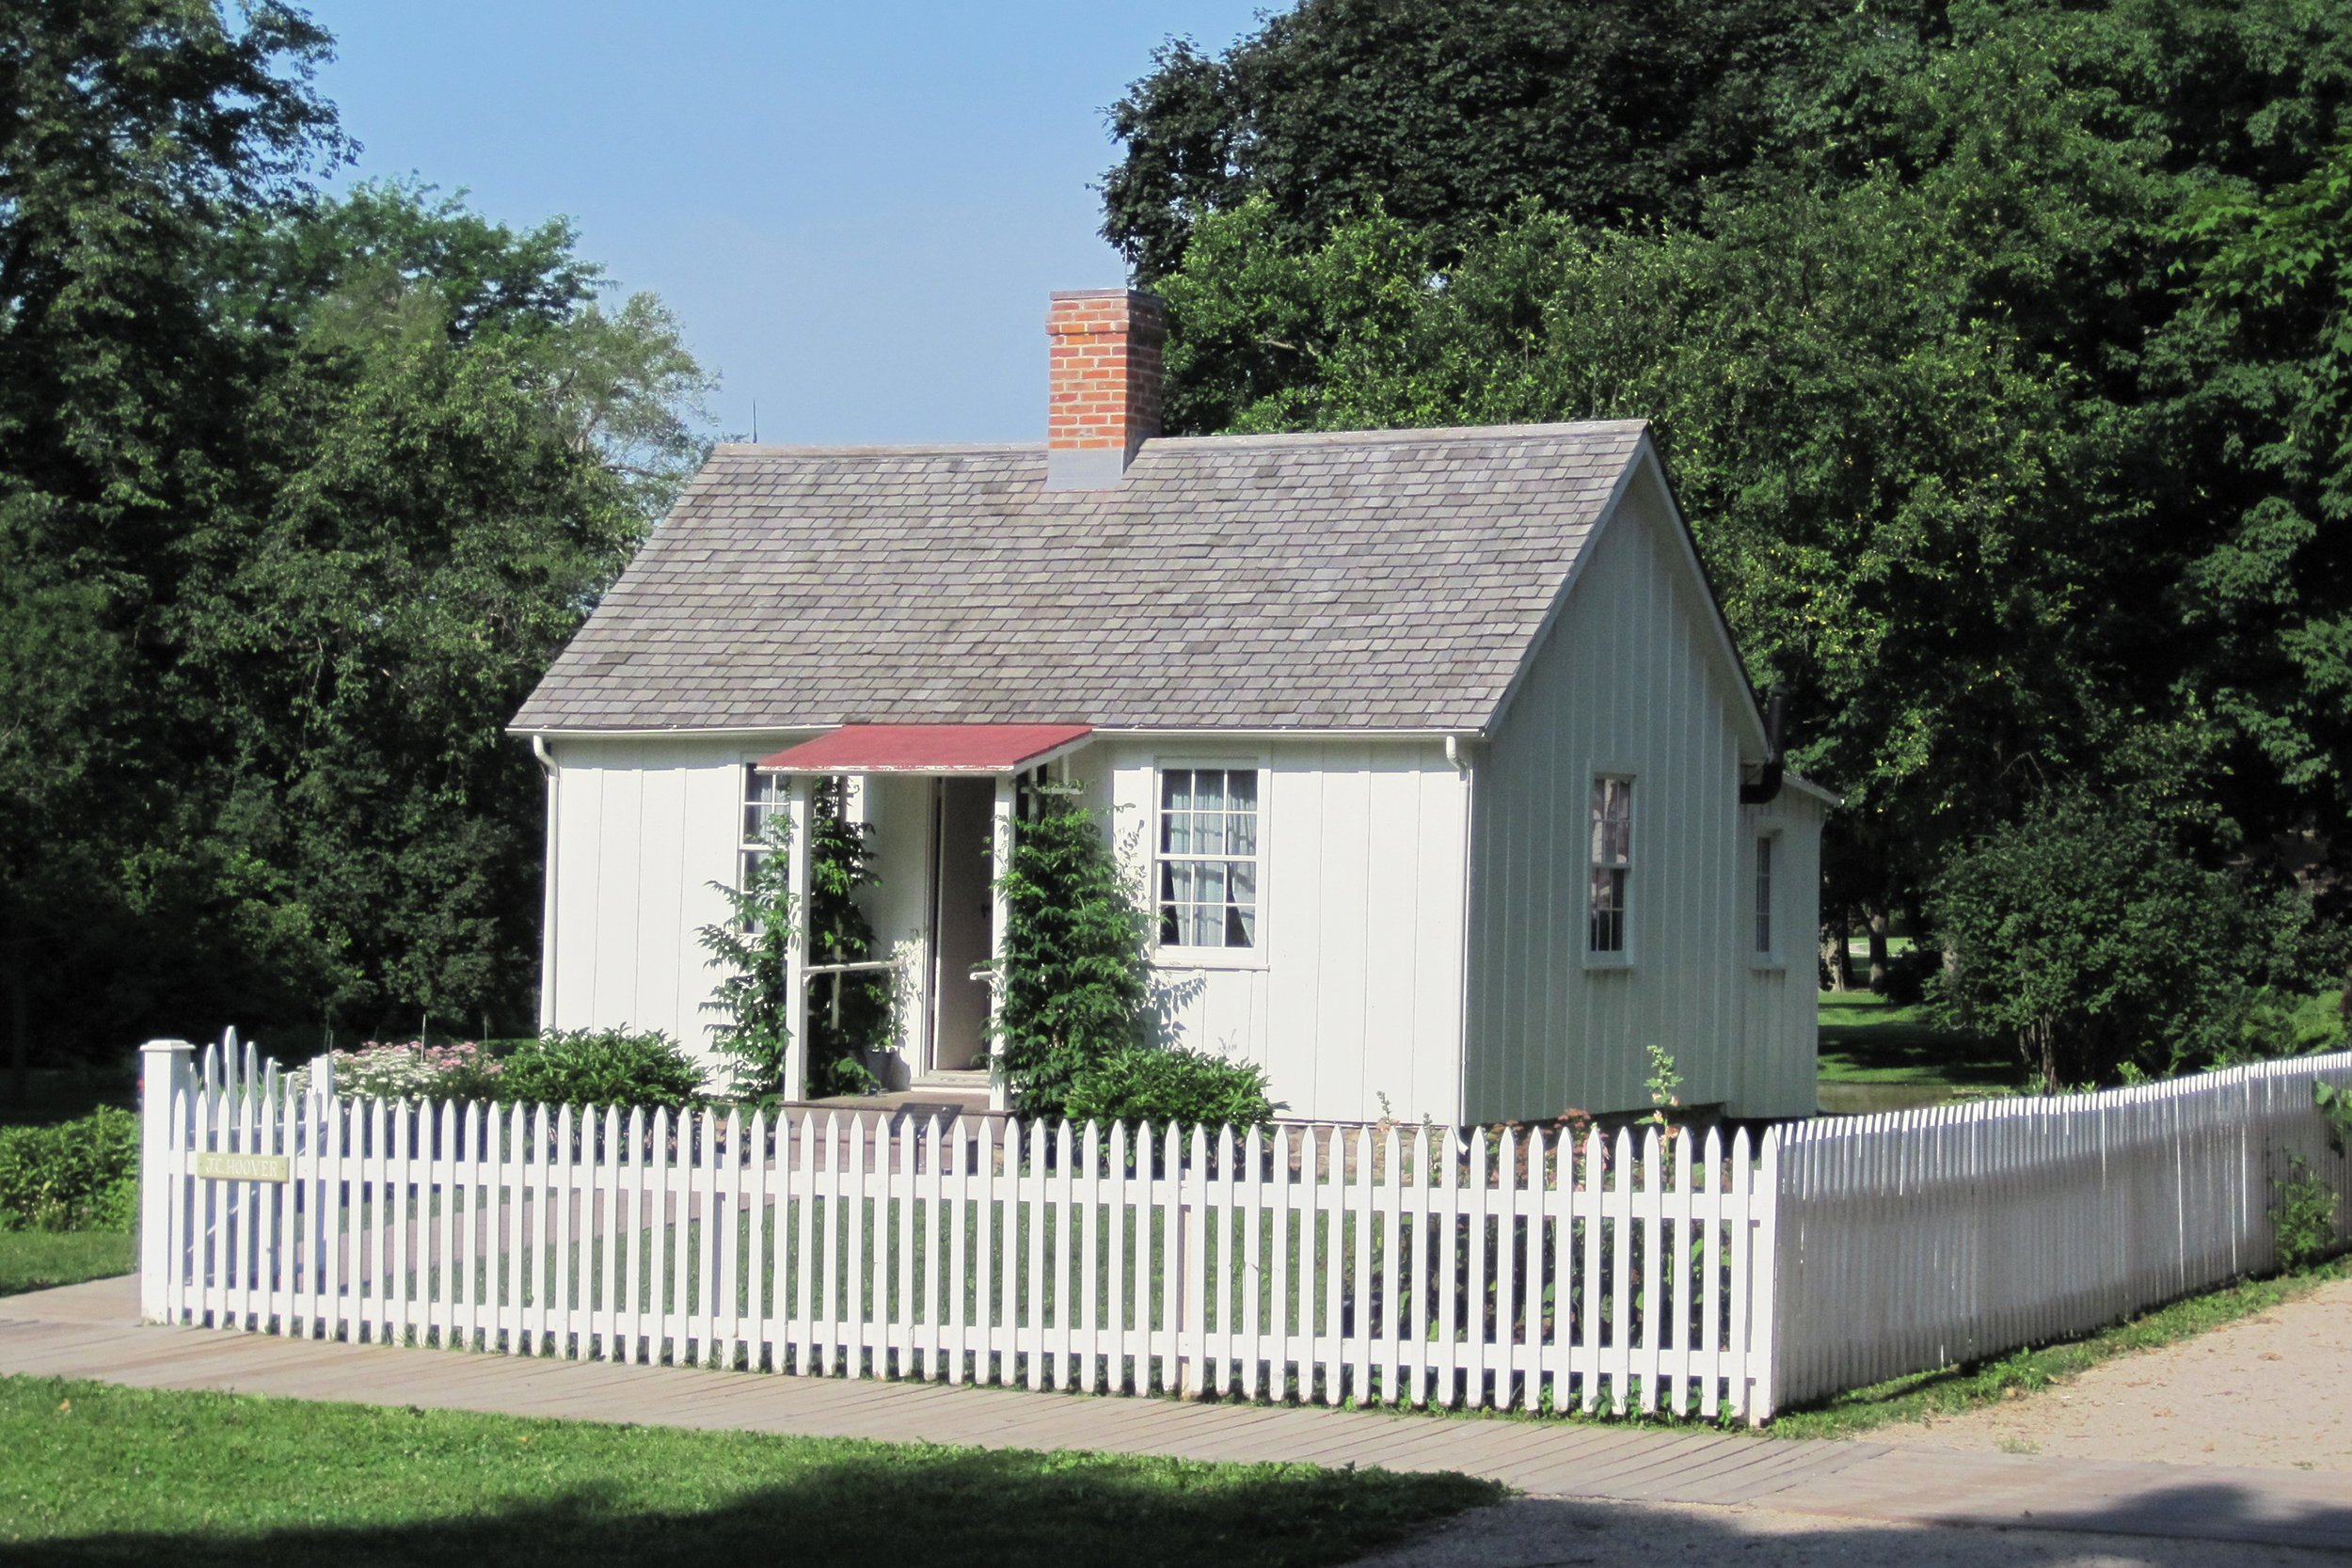 <p>Built in 1874, a small white-picket-fence cottage in West Branch, Iowa, was President Herbert Hoover's birthplace and childhood home until he turned 11. The <a href="https://www.nps.gov/heho/index.htm">historic site</a> includes his father's blacksmith shop, a schoolhouse, and the president's gravesite. There's no fee to visit, but entrance to the Herbert Hoover Presidential Library and Museum costs $3 to $10.</p>